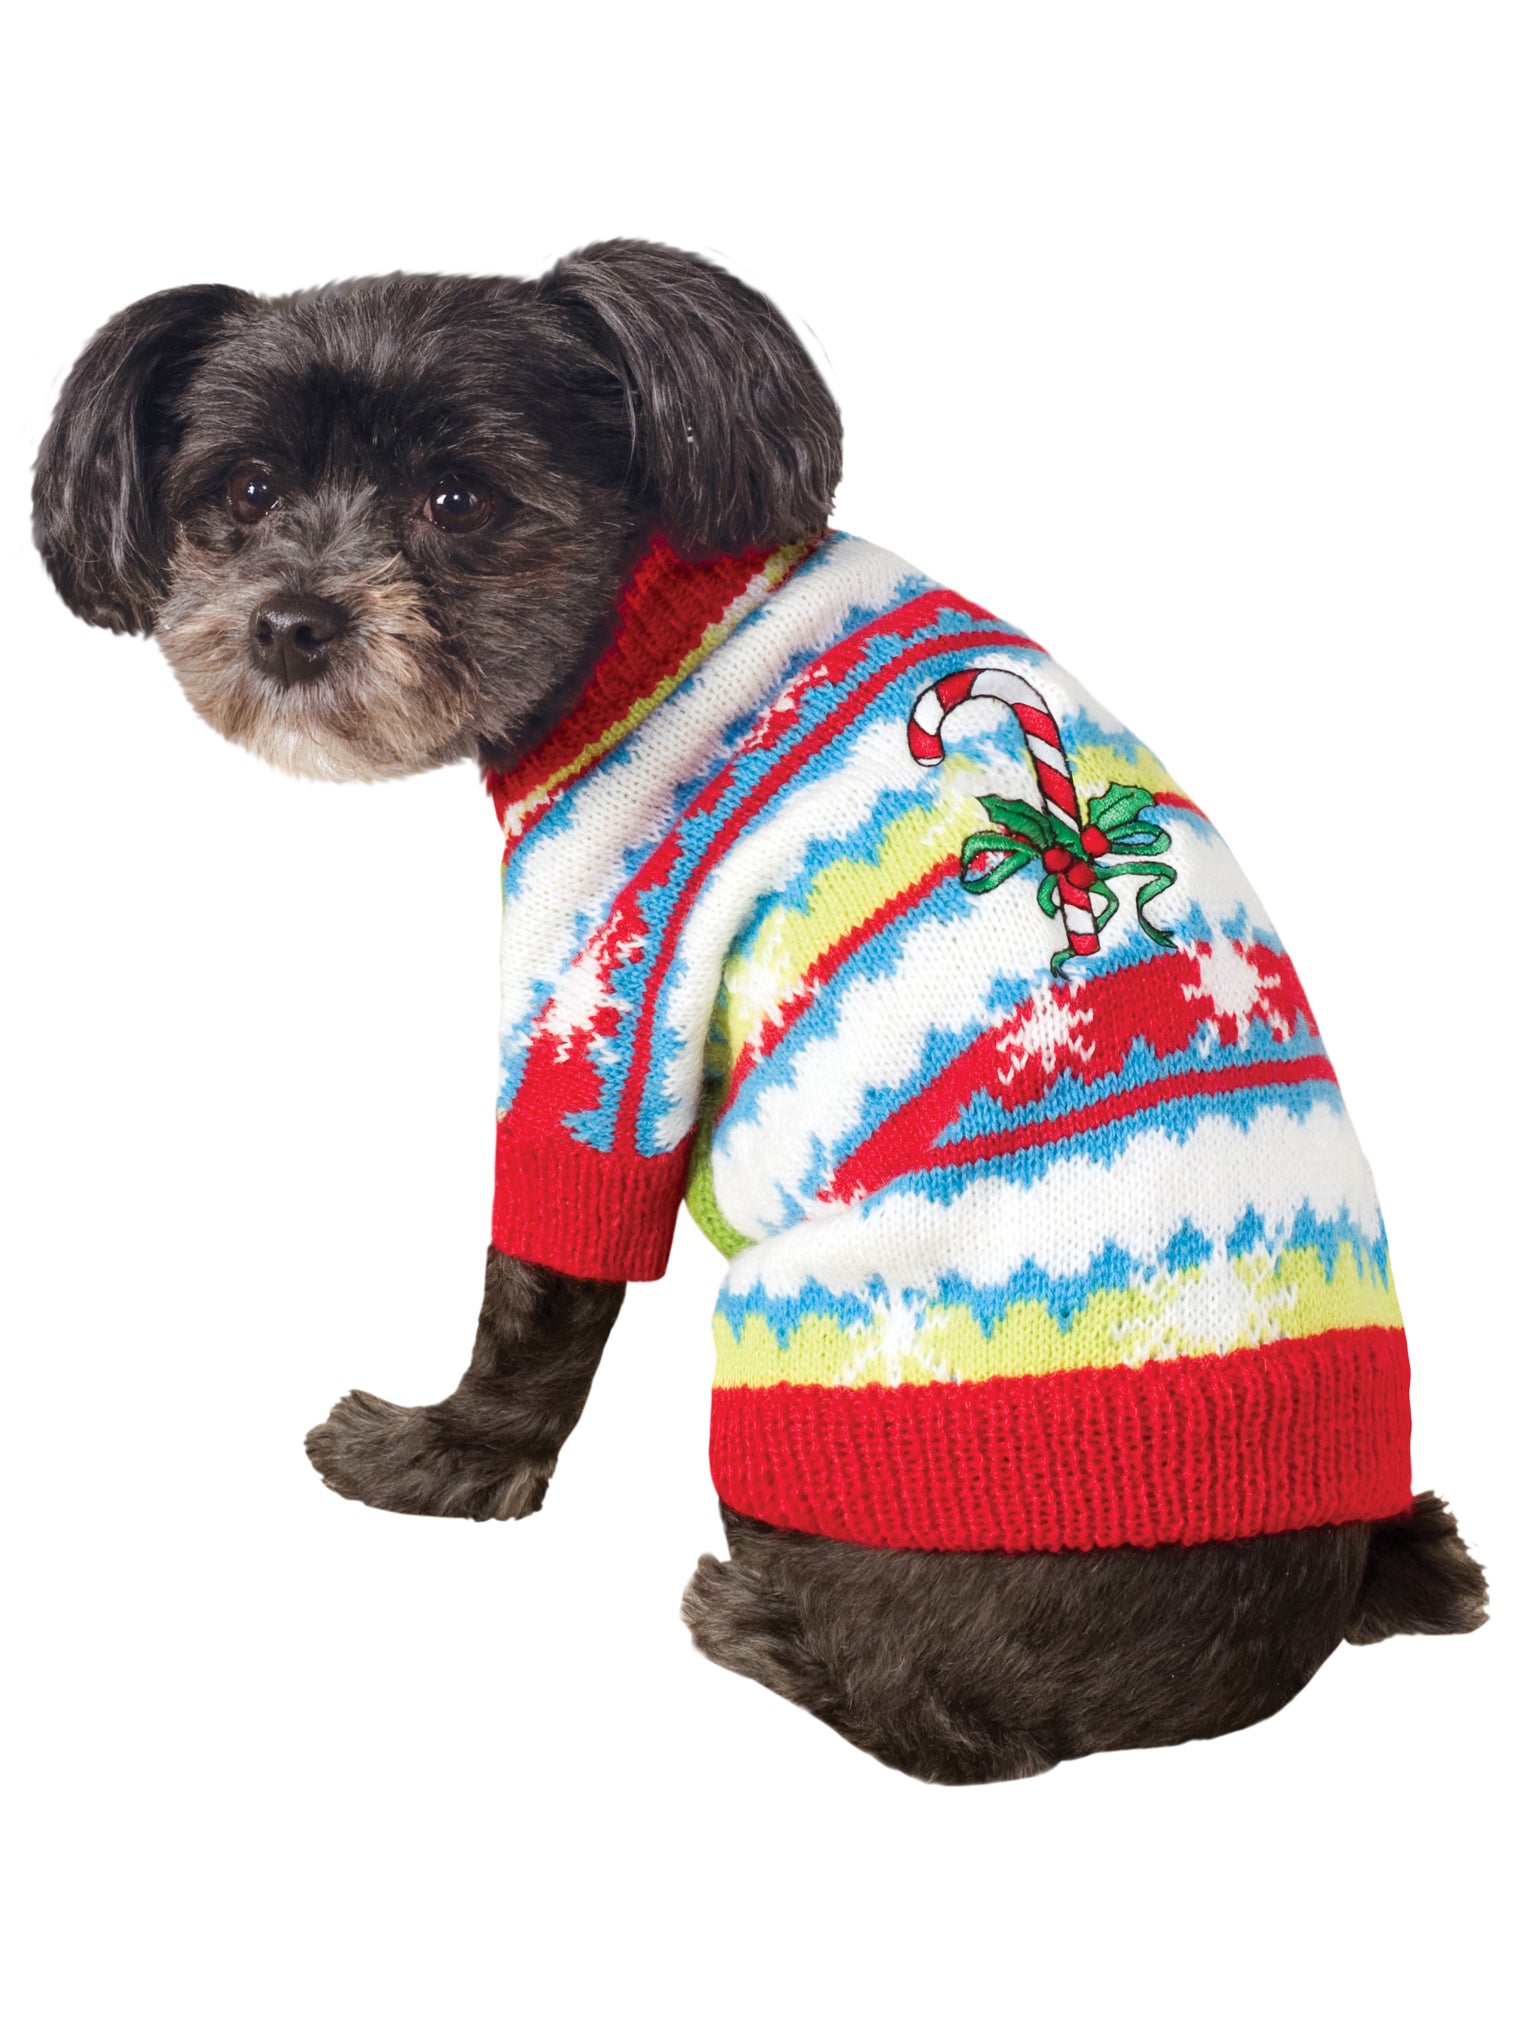 Pet Ugly Christmas Sweater Costume - costumes.com